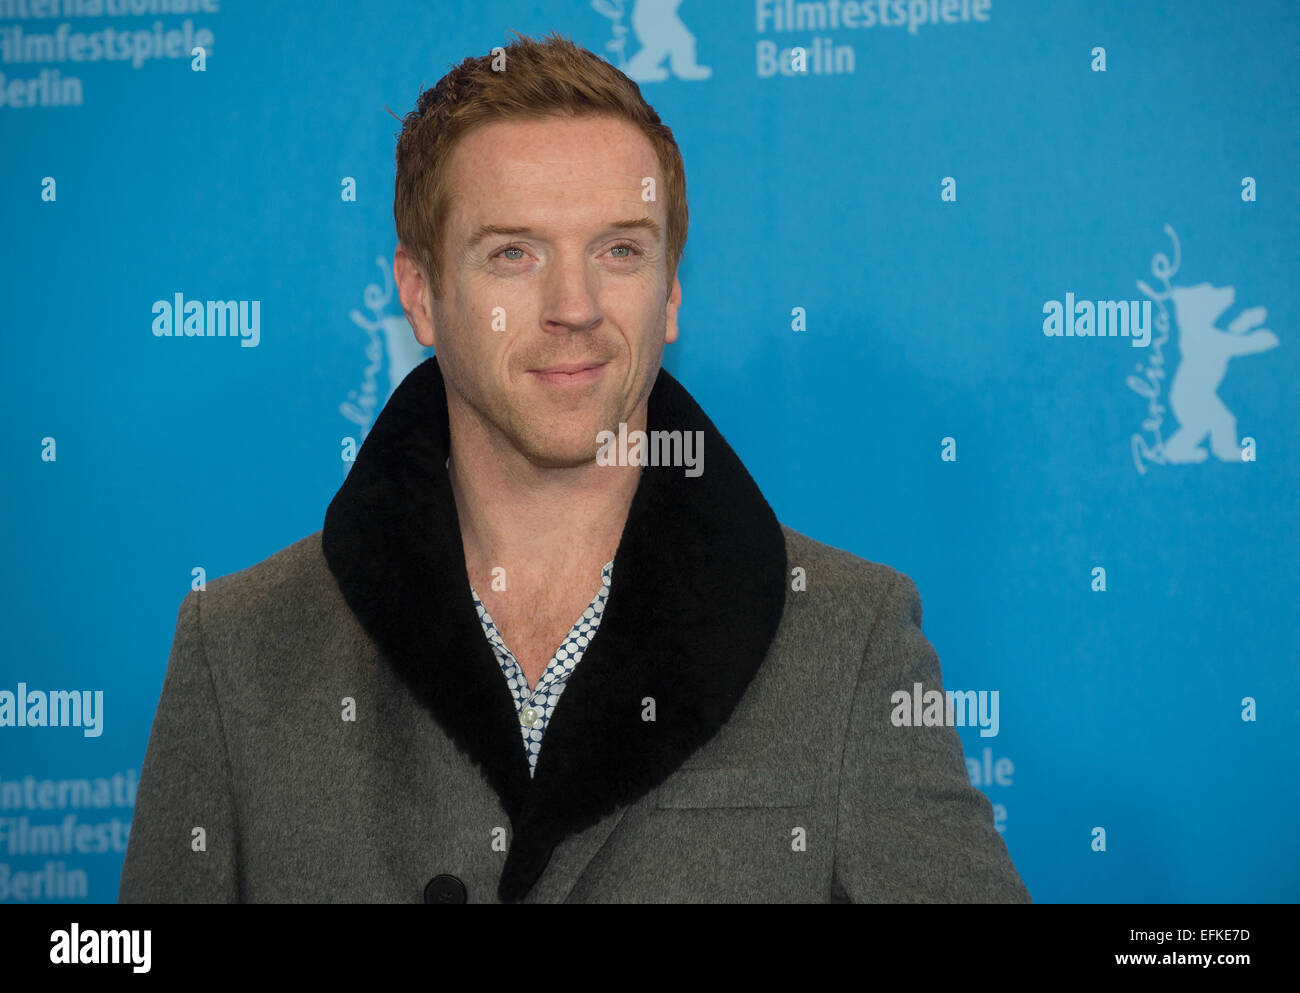 Berlin, Germany. 06th Feb, 2015. British actor Damian Lewis poses during the photocall for 'Queen of the Desert' at the 65th annual Berlin Film Festival, in Berlin, Germany, 06 February 2015. The movie is presented in the Official Competition of the Berlinale, which runs from 05 to 15 February 2015. PHOTO: TIM BRAKEMEIER/dpa/Alamy Live News Stock Photo